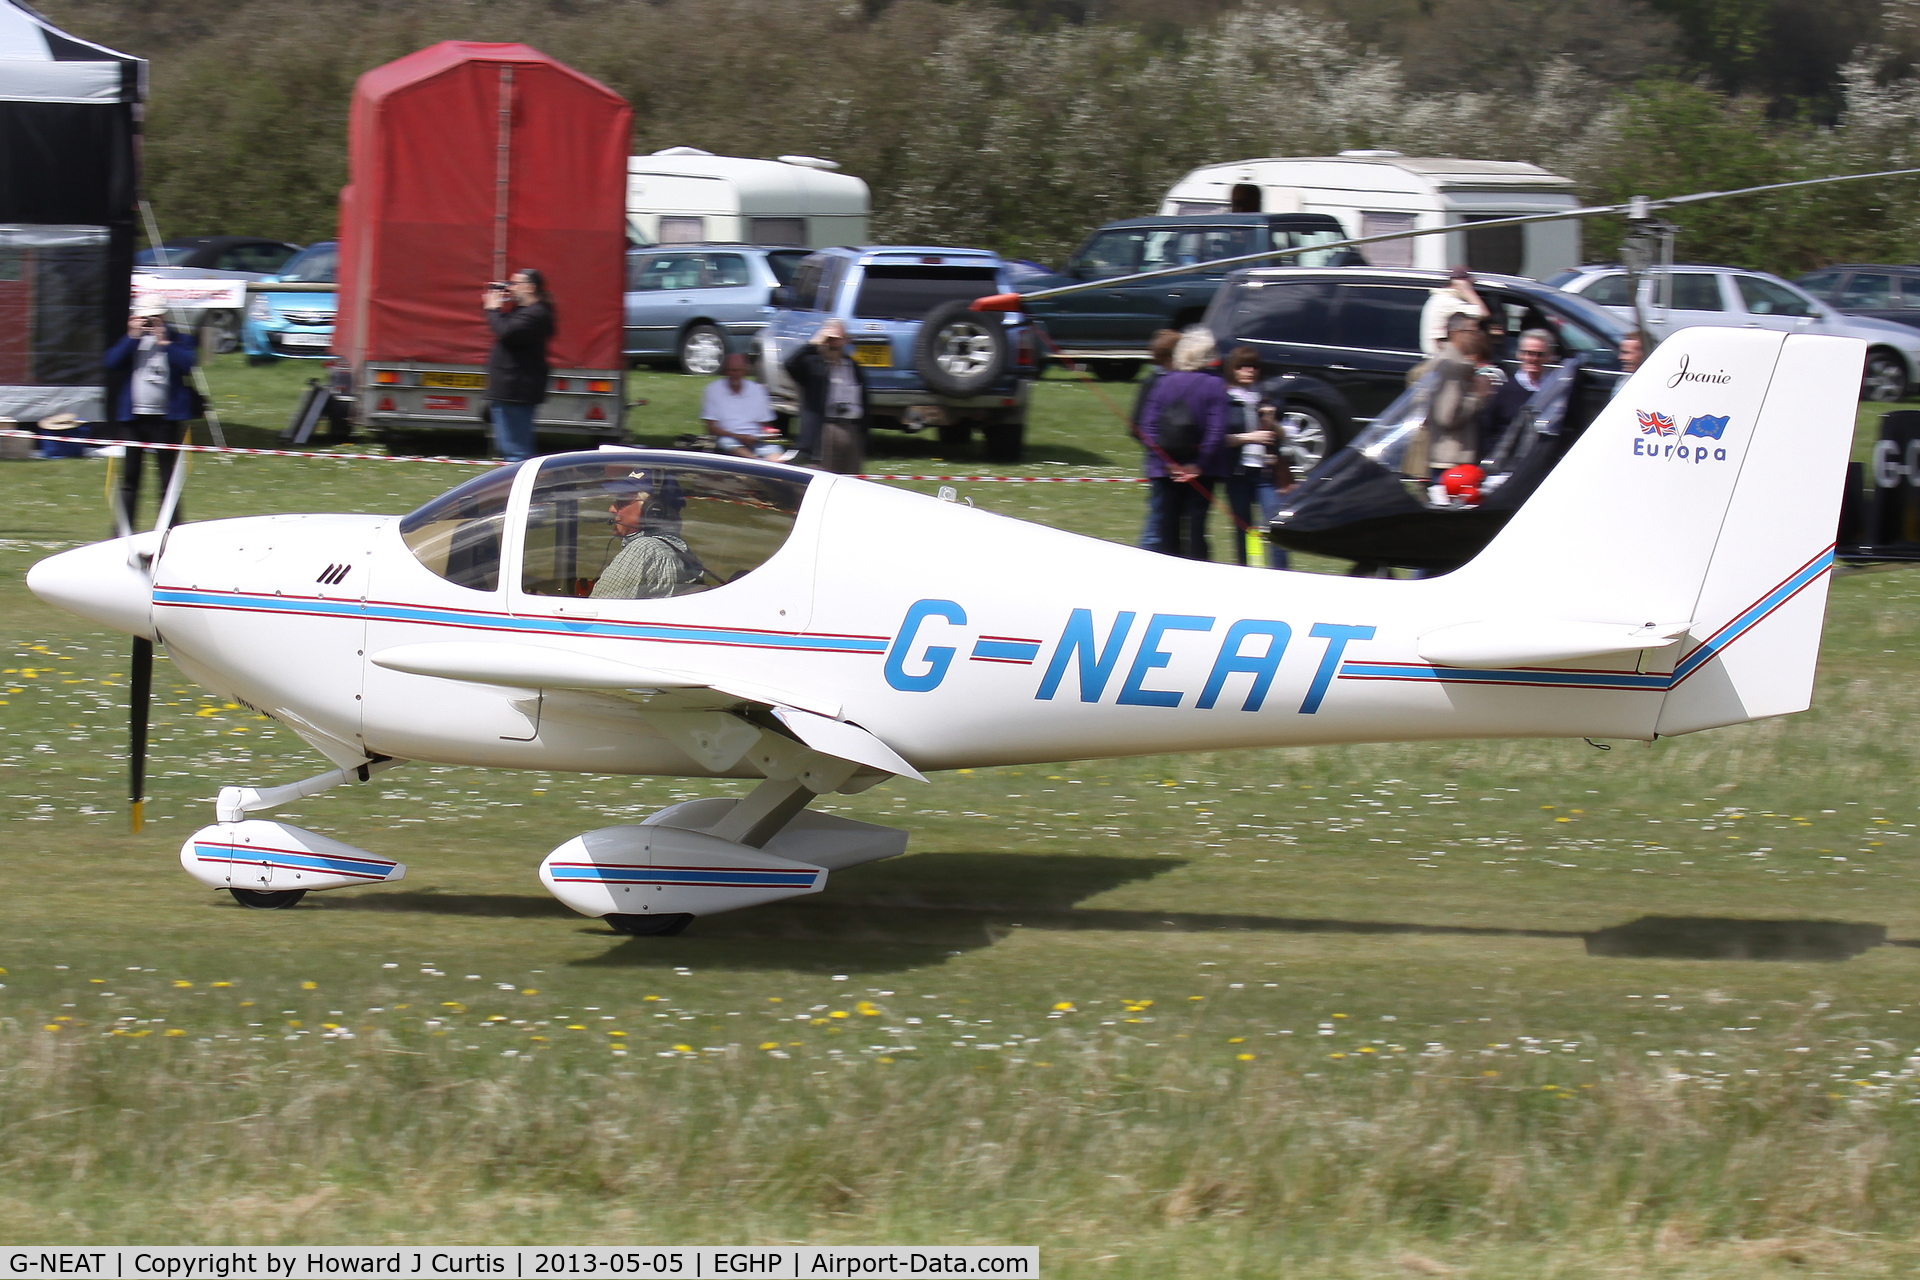 G-NEAT, 1996 Europa Tri-Gear C/N PFA 247-12642, Privately owned. At the Microlight Trade Fair.